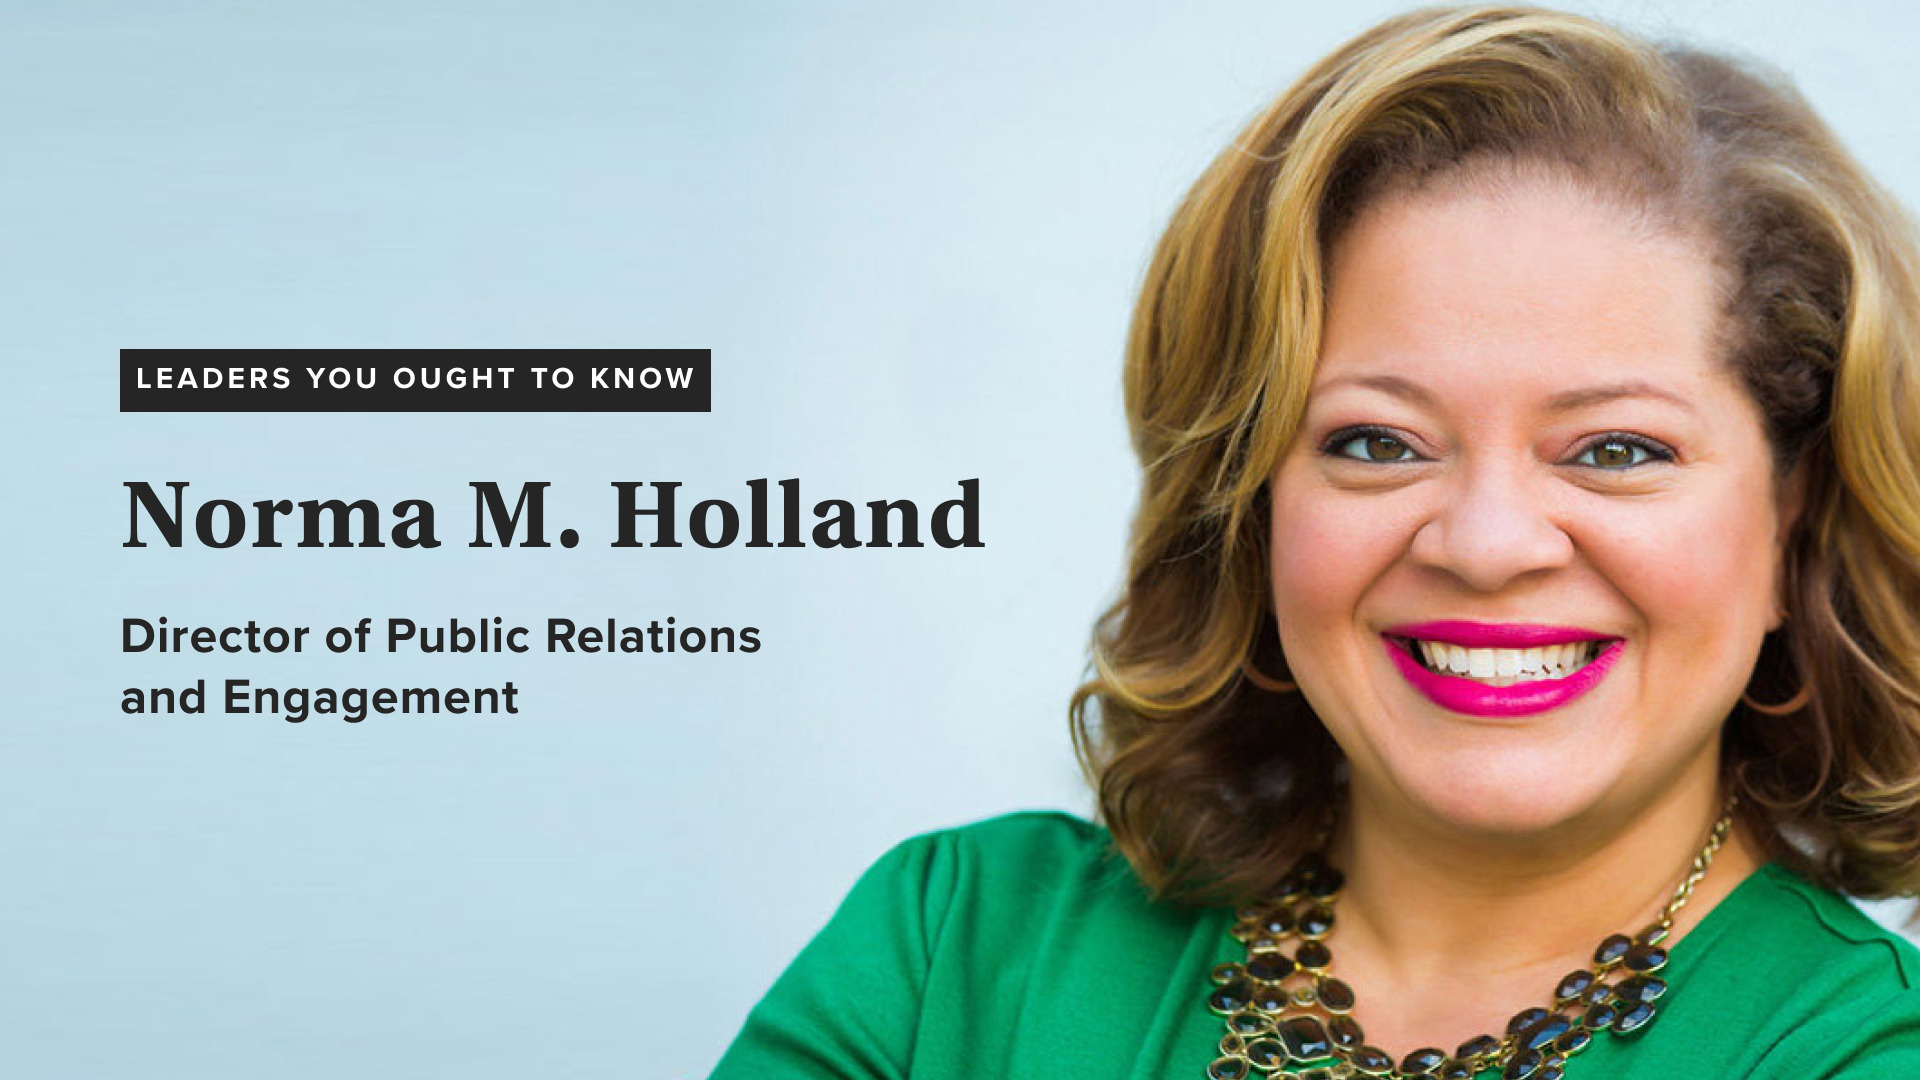 Emerging Leaders Presents: Leaders you ought to know, featuring Norma M. Holland